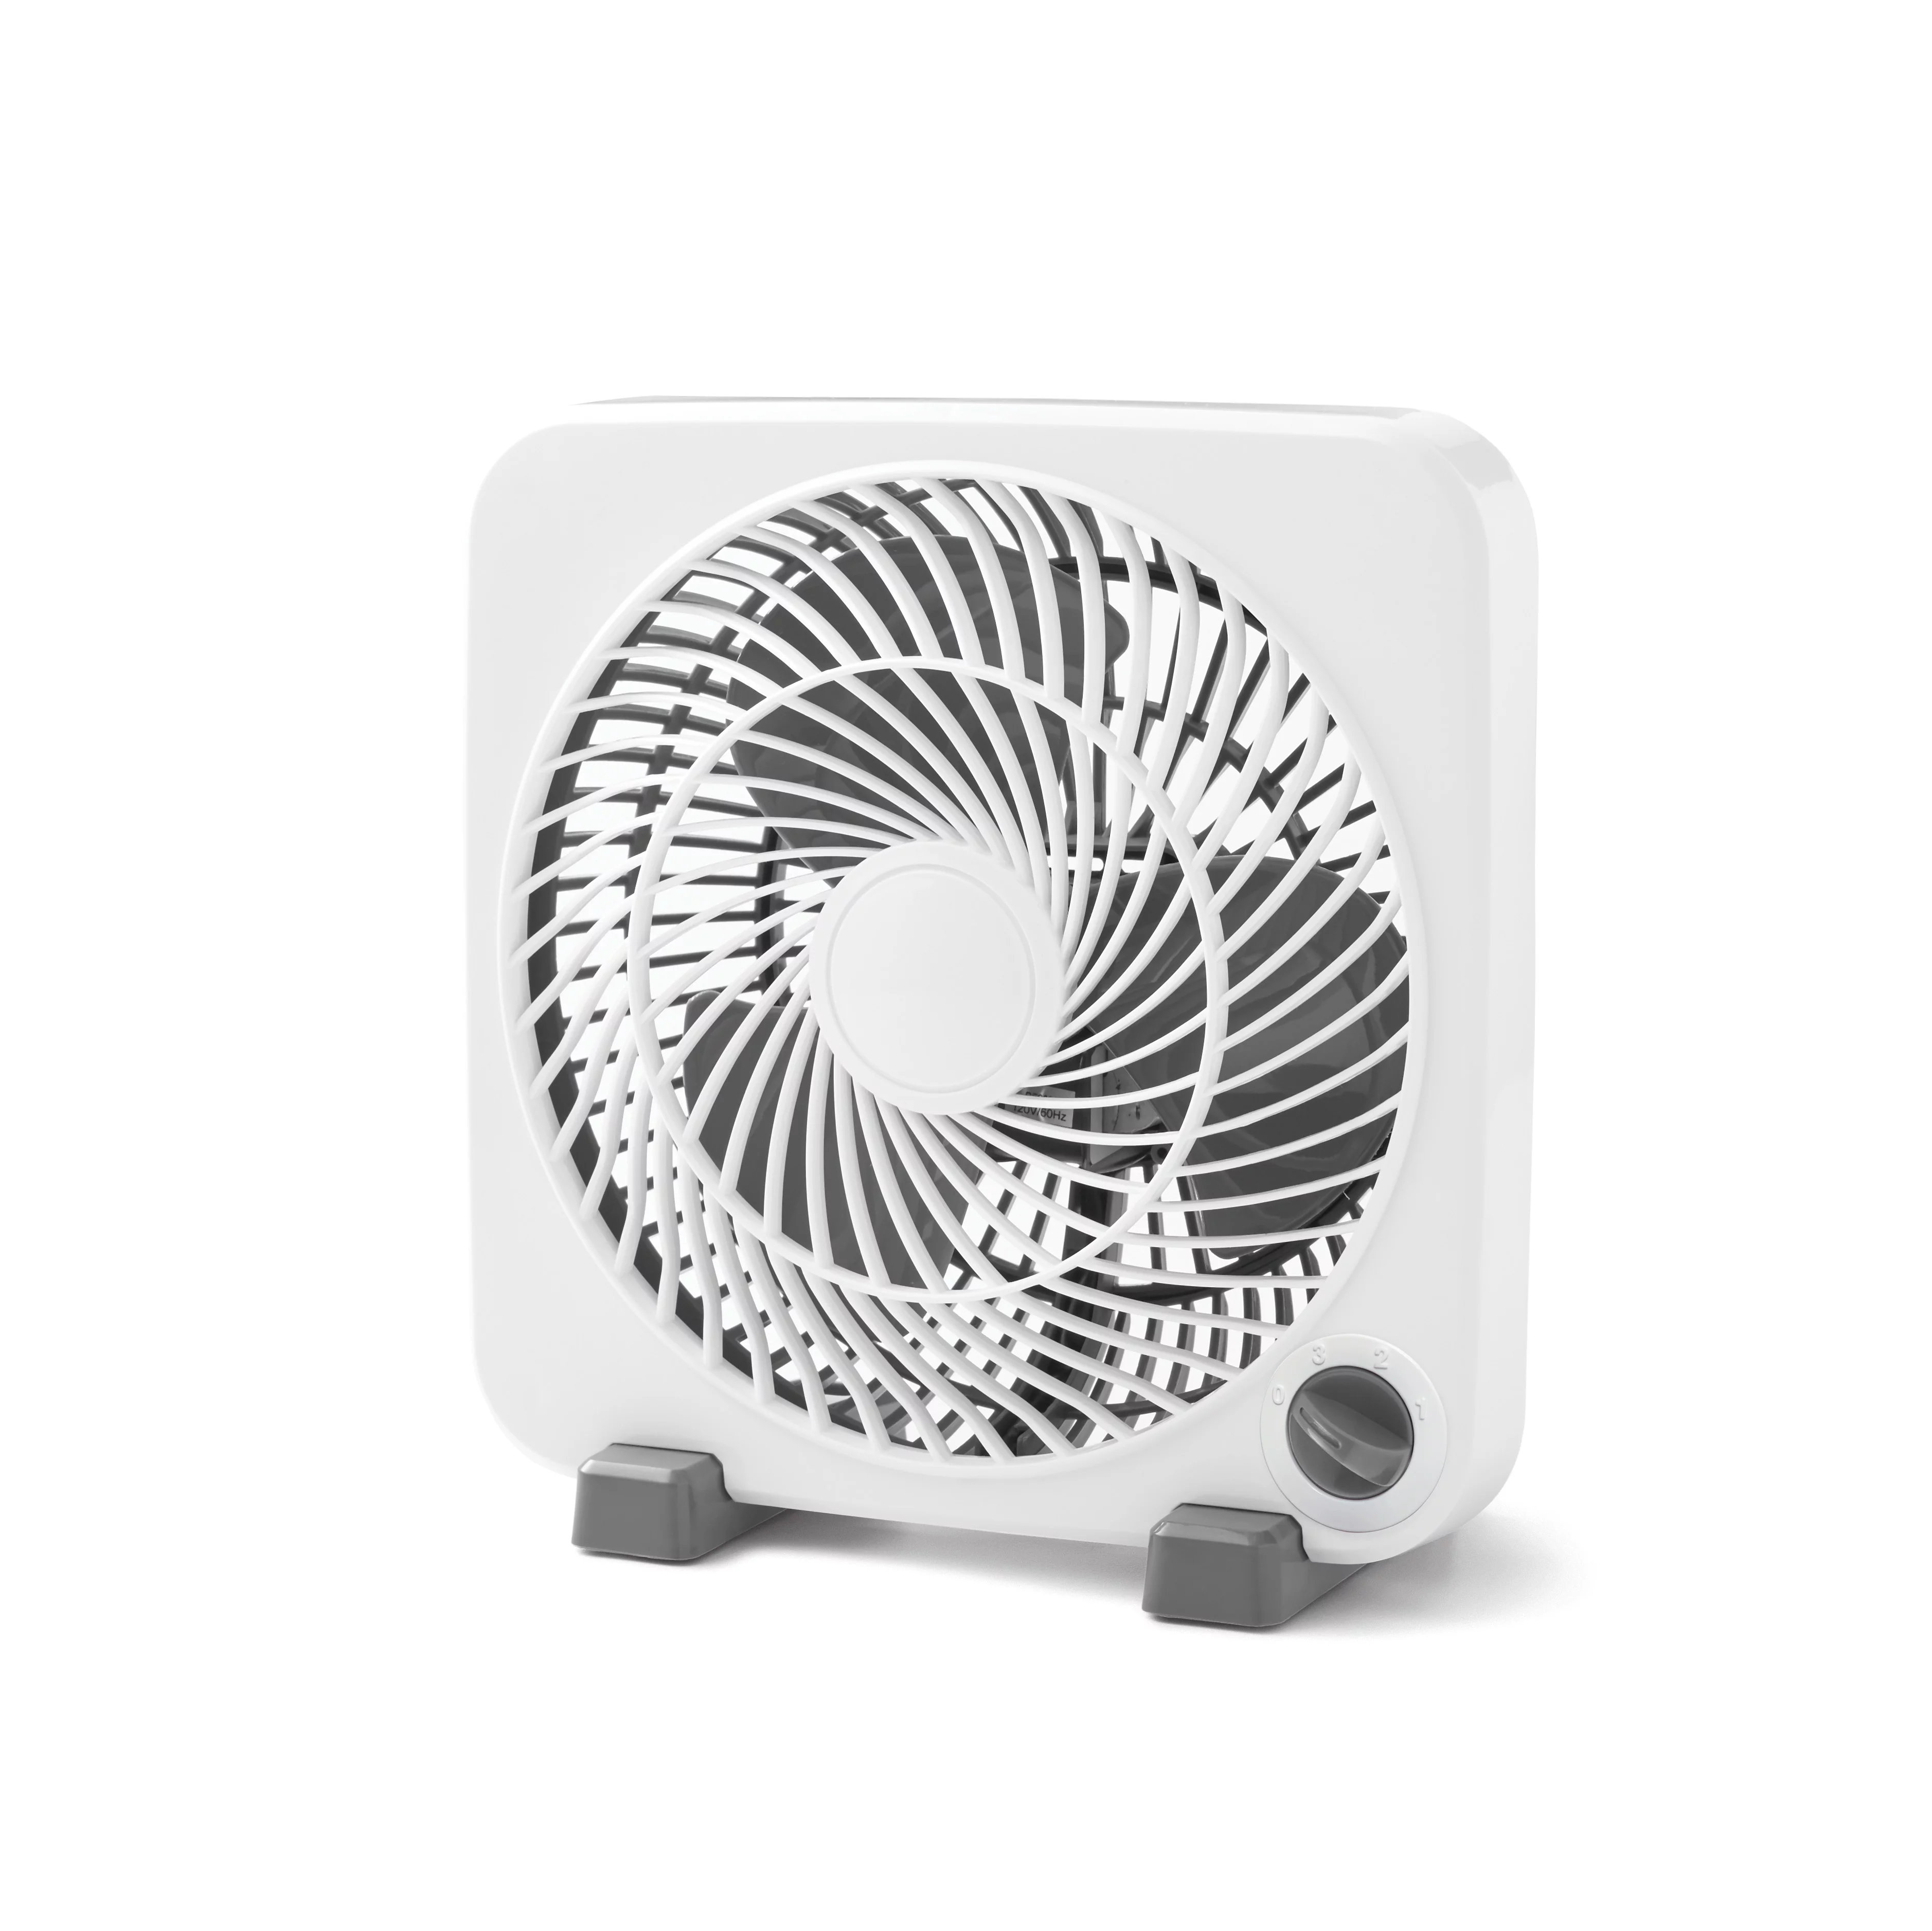 Mainstays 9 inch Personal Desktop Fan with 3 Speeds, White